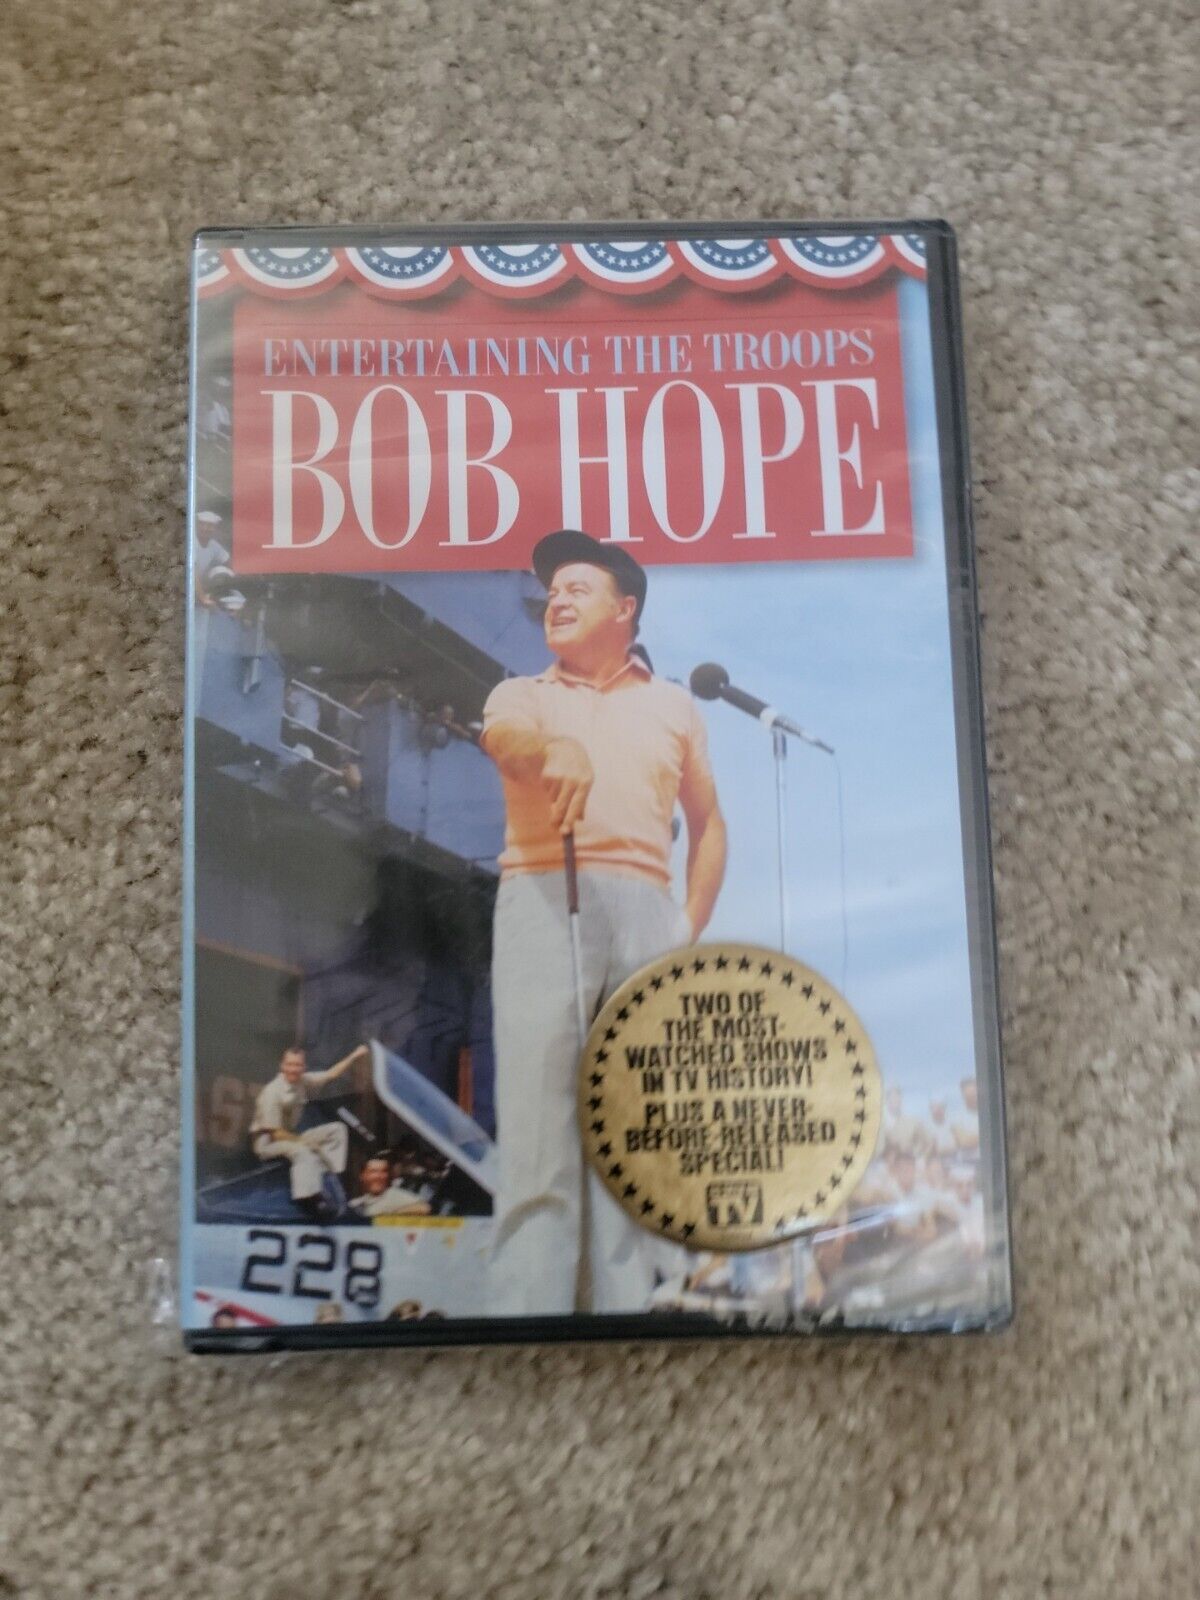 BOB HOPE ENTERTAINING THE TROOPS DVD SET LUCILLE BALL JAYNE MANSFIELD NEW SEALED